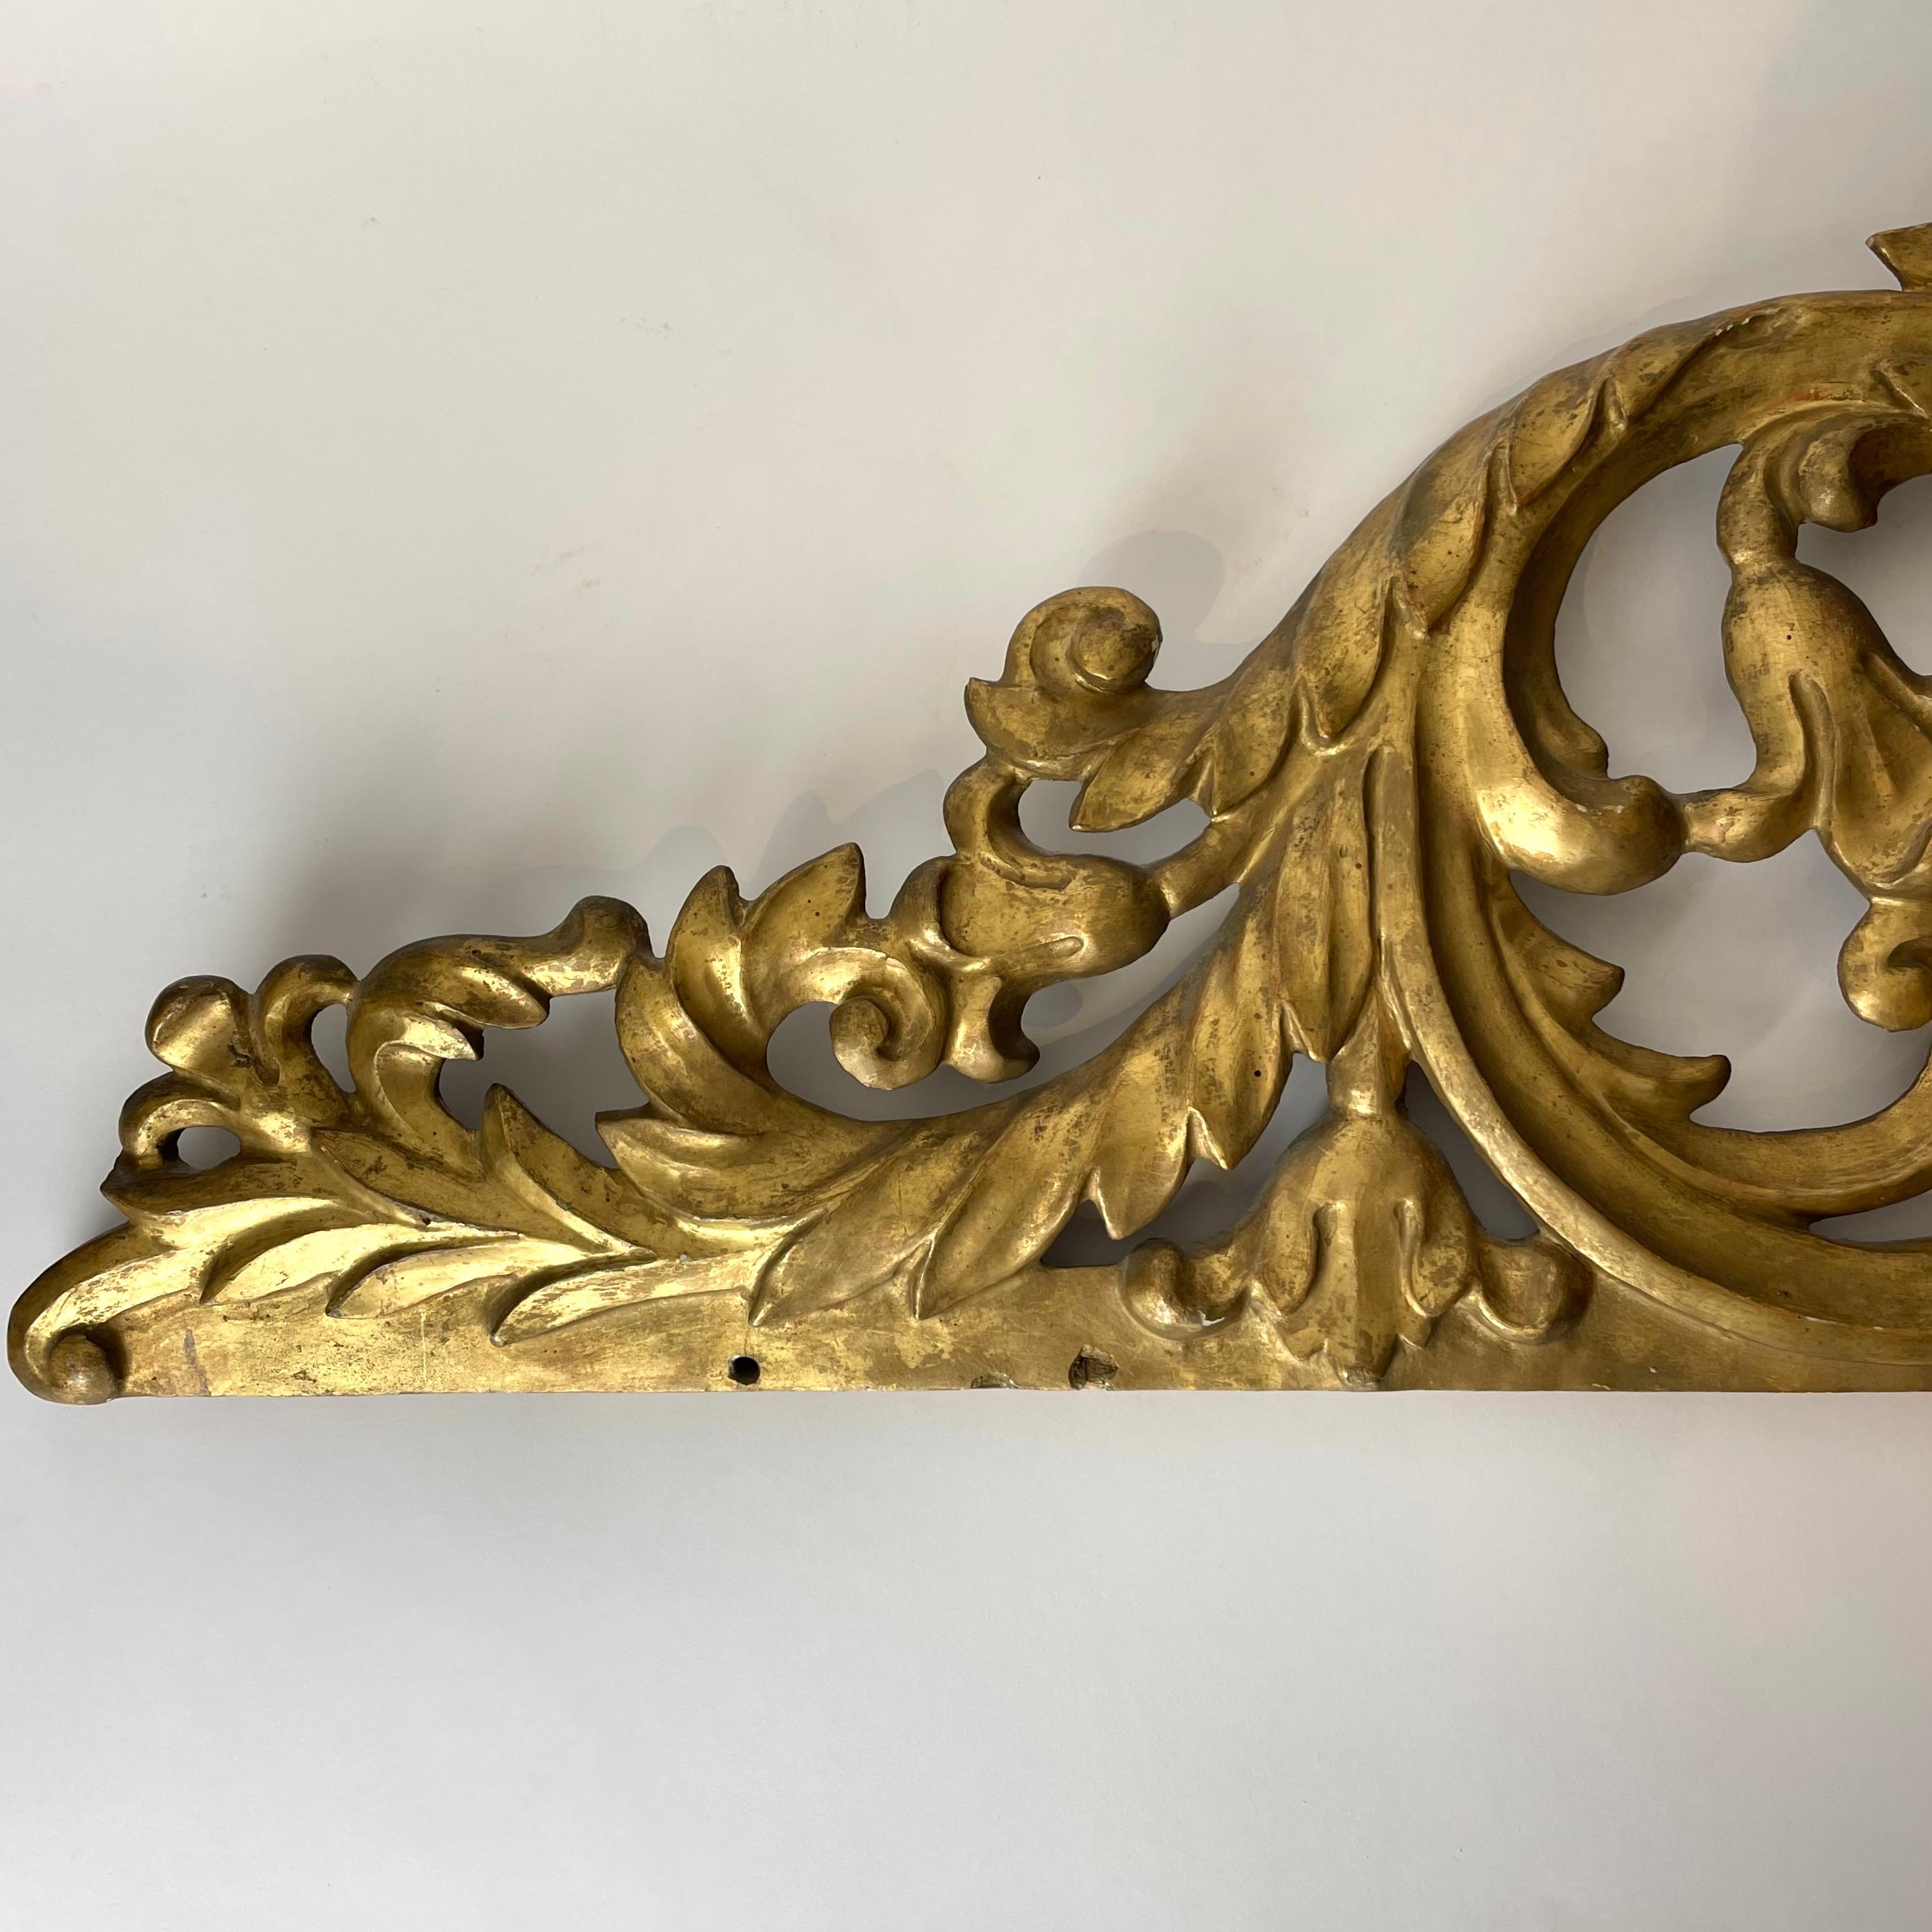 Decorative Door Moulding Architrave Gilt and Silvered Wood Panel, 18th Century For Sale 3